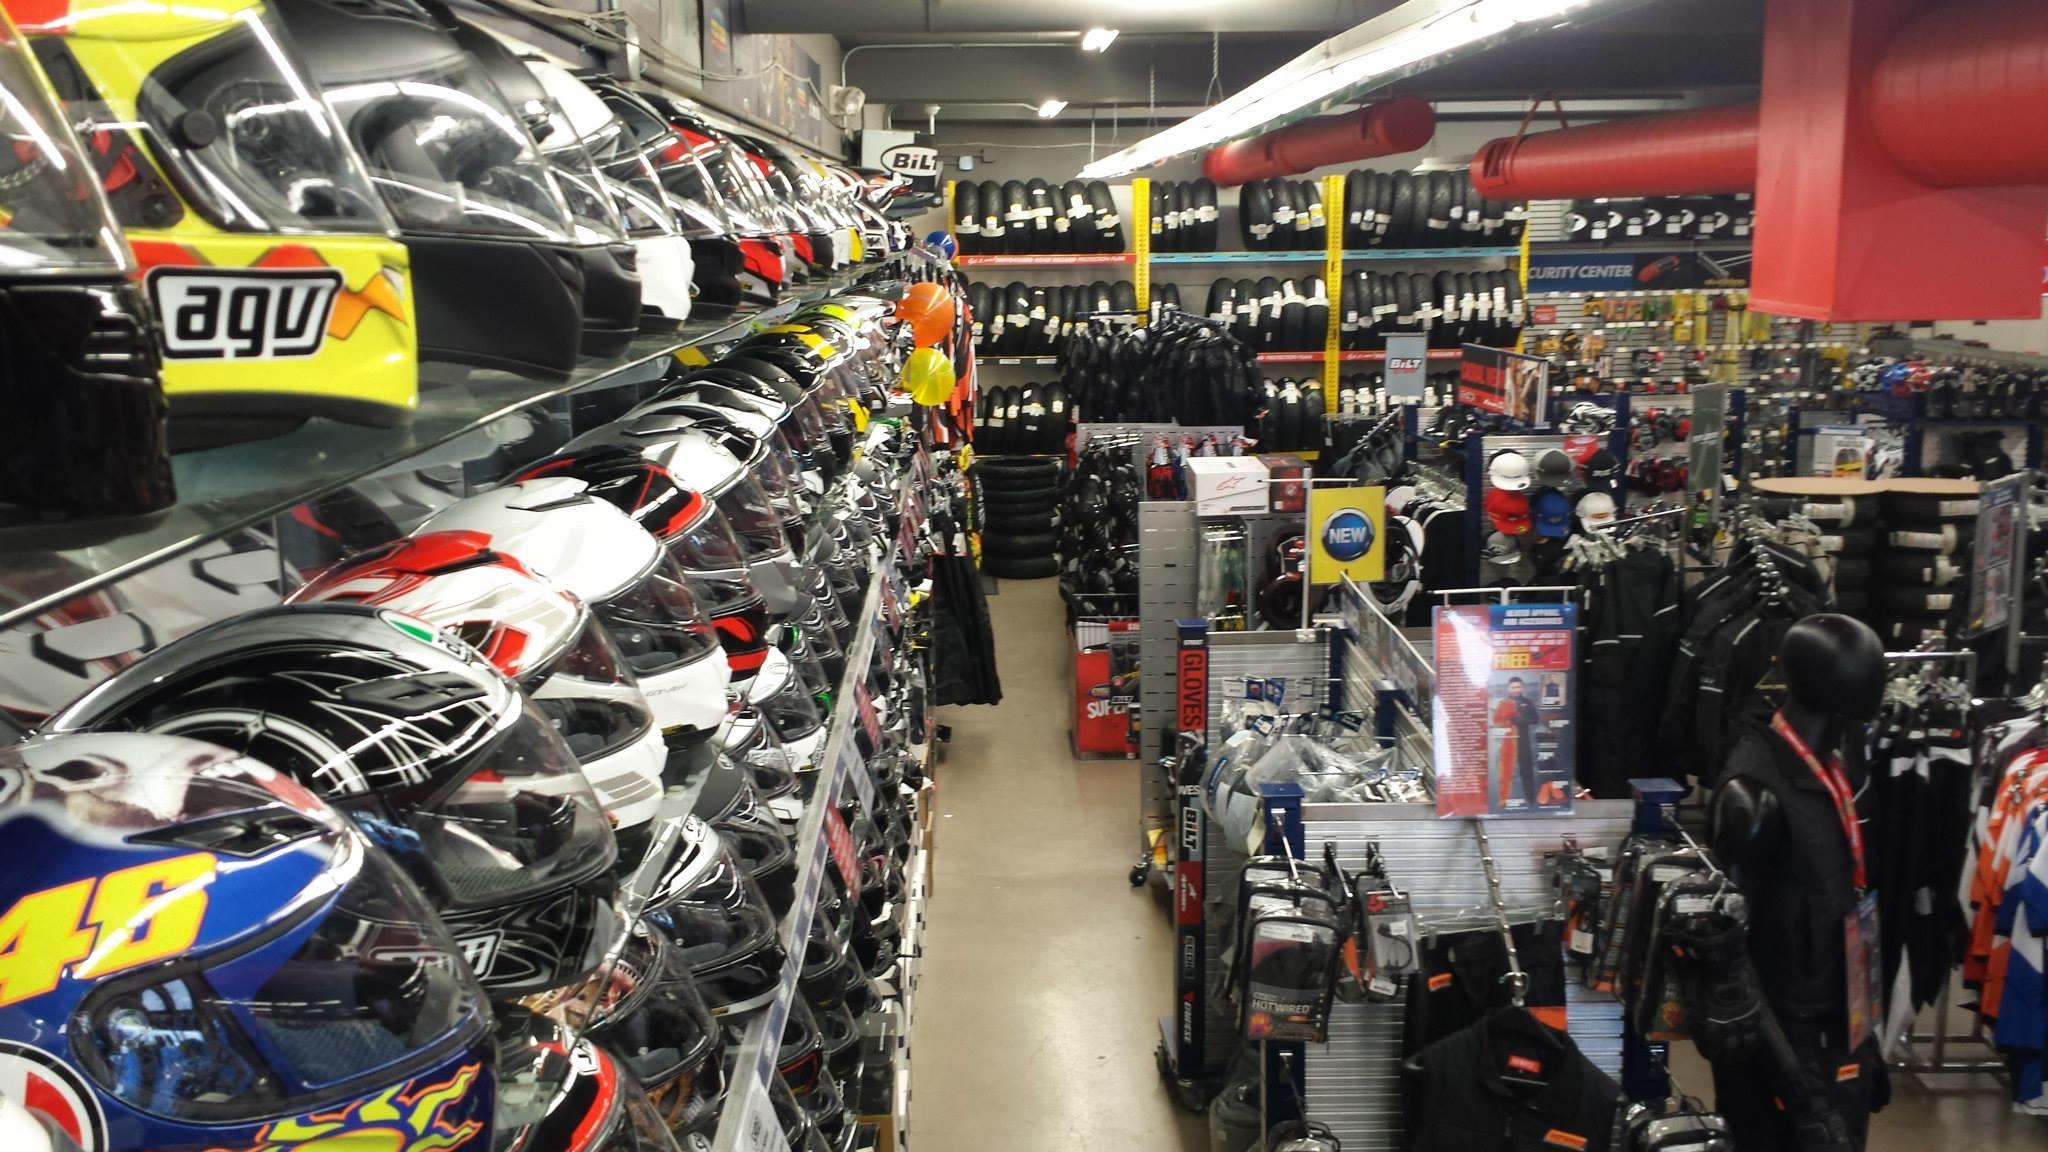 Cycle Gear Coupons near me in Edison, NJ 08817 | 8coupons